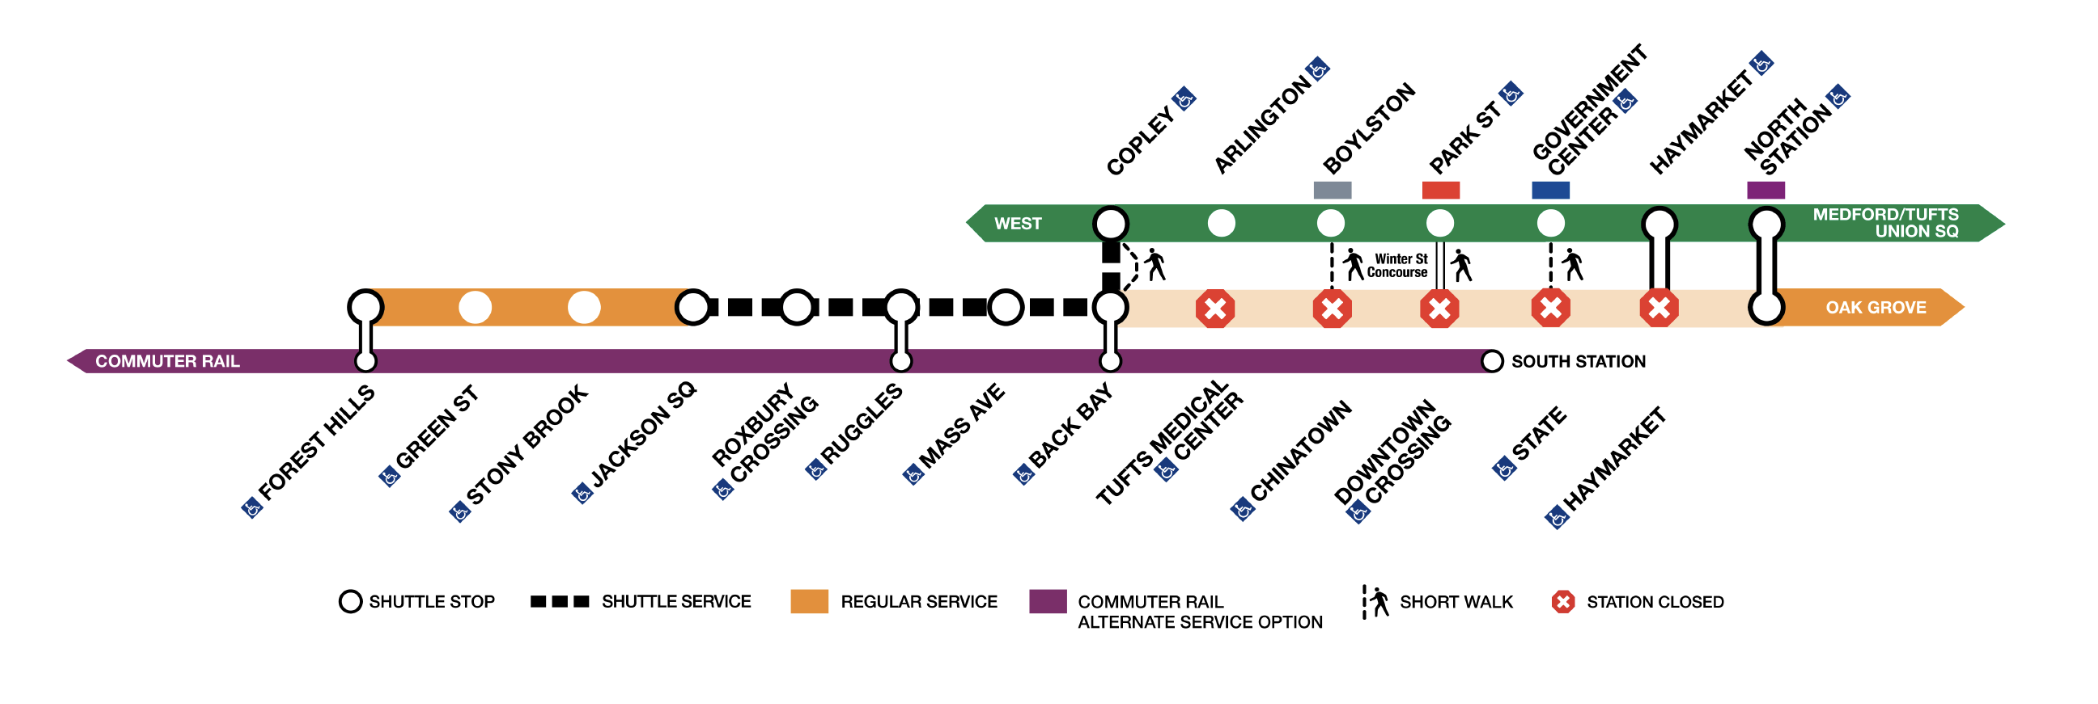 A diagramatic map of transit diversions available during the Orange Line shutdown. Three parallel lines show the Green Line (top), which parallels the Orange Line from Copley (a short walk from the Back Bay stop) to North Station, the Orange Line (middle), which will be closed between Jackson Square and North Station, with bus shuttles serving the five stops between Jackson Square and Back Bay, and a purple line indicating NE corridor service from Forest Hills to Ruggles to Back Bay to South Station.